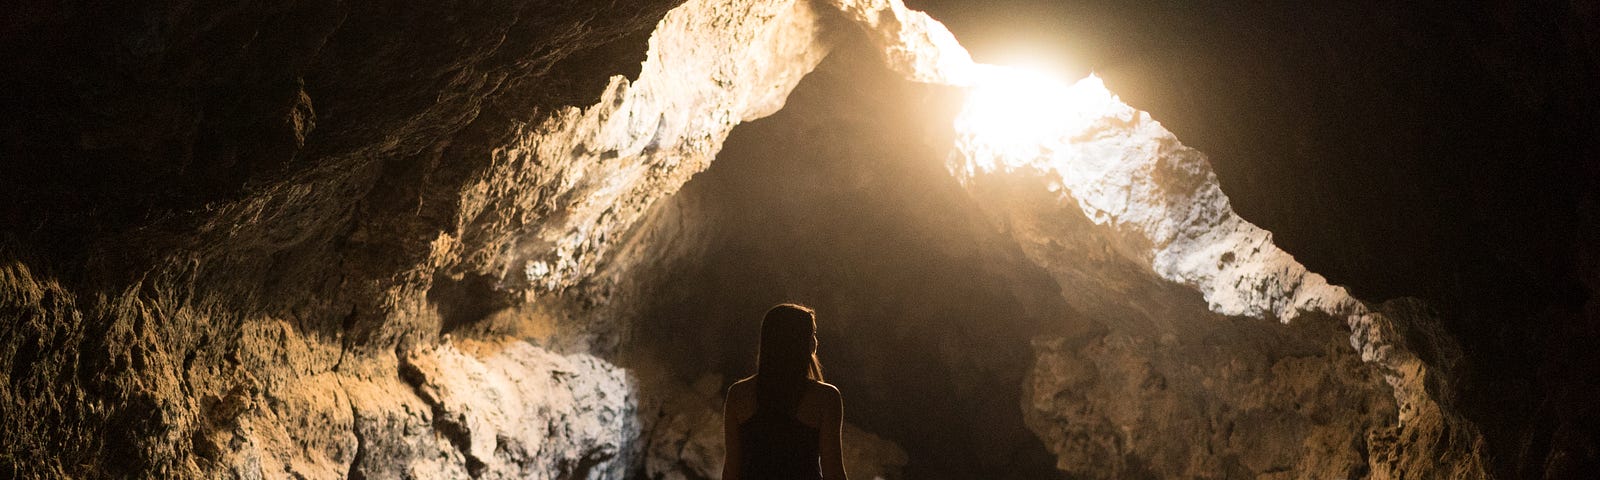 Woman standing in a cave where the light shines through a crack